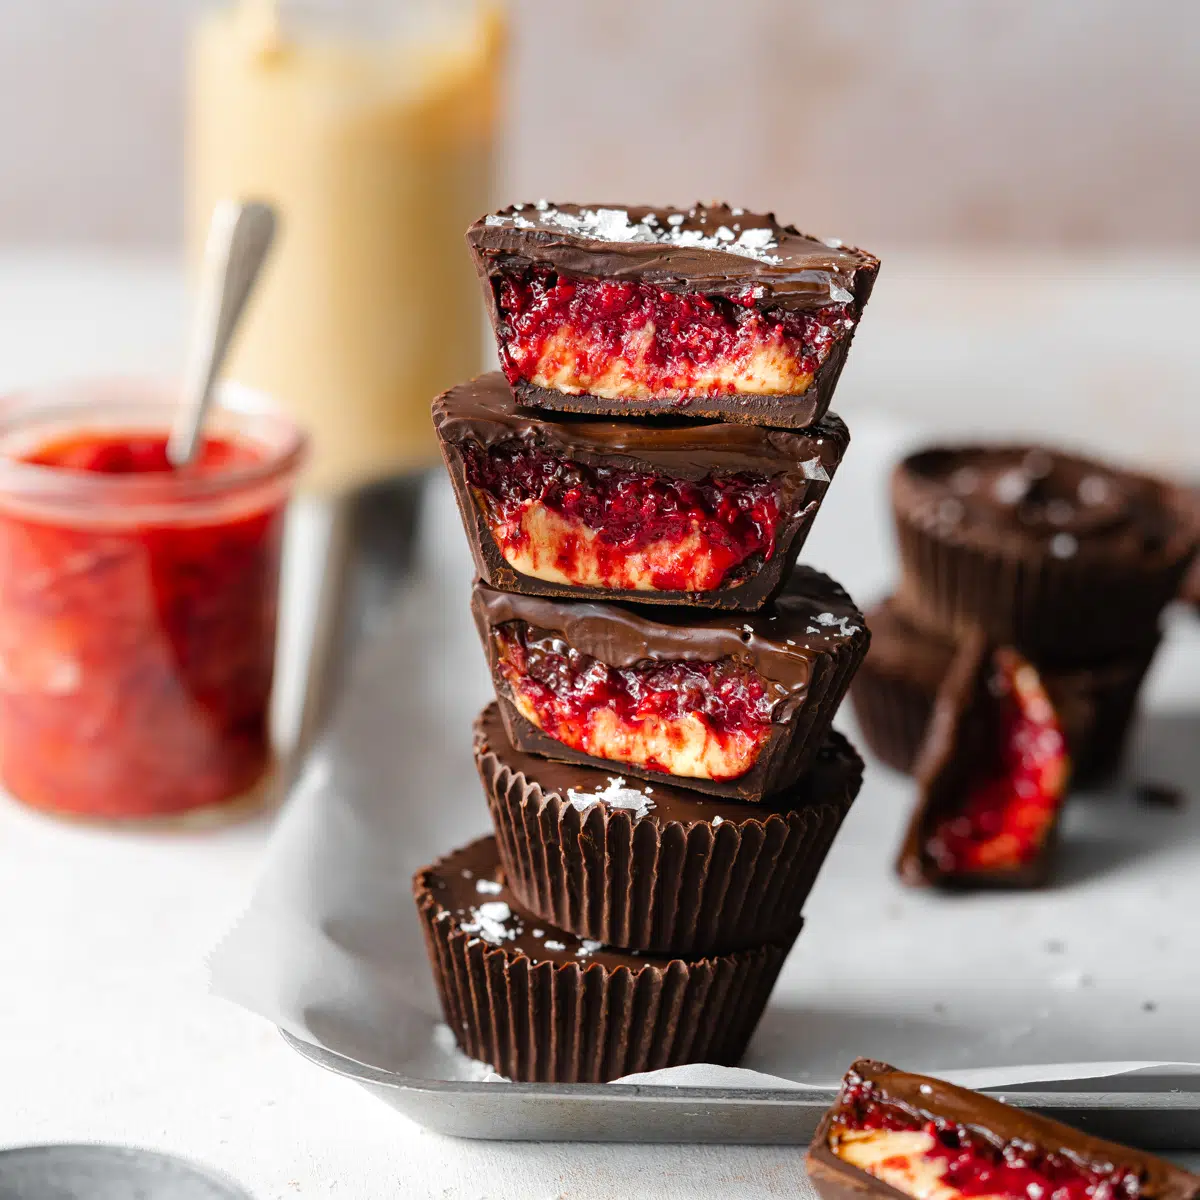 Peanut Butter and Jelly Cups (Vegan)